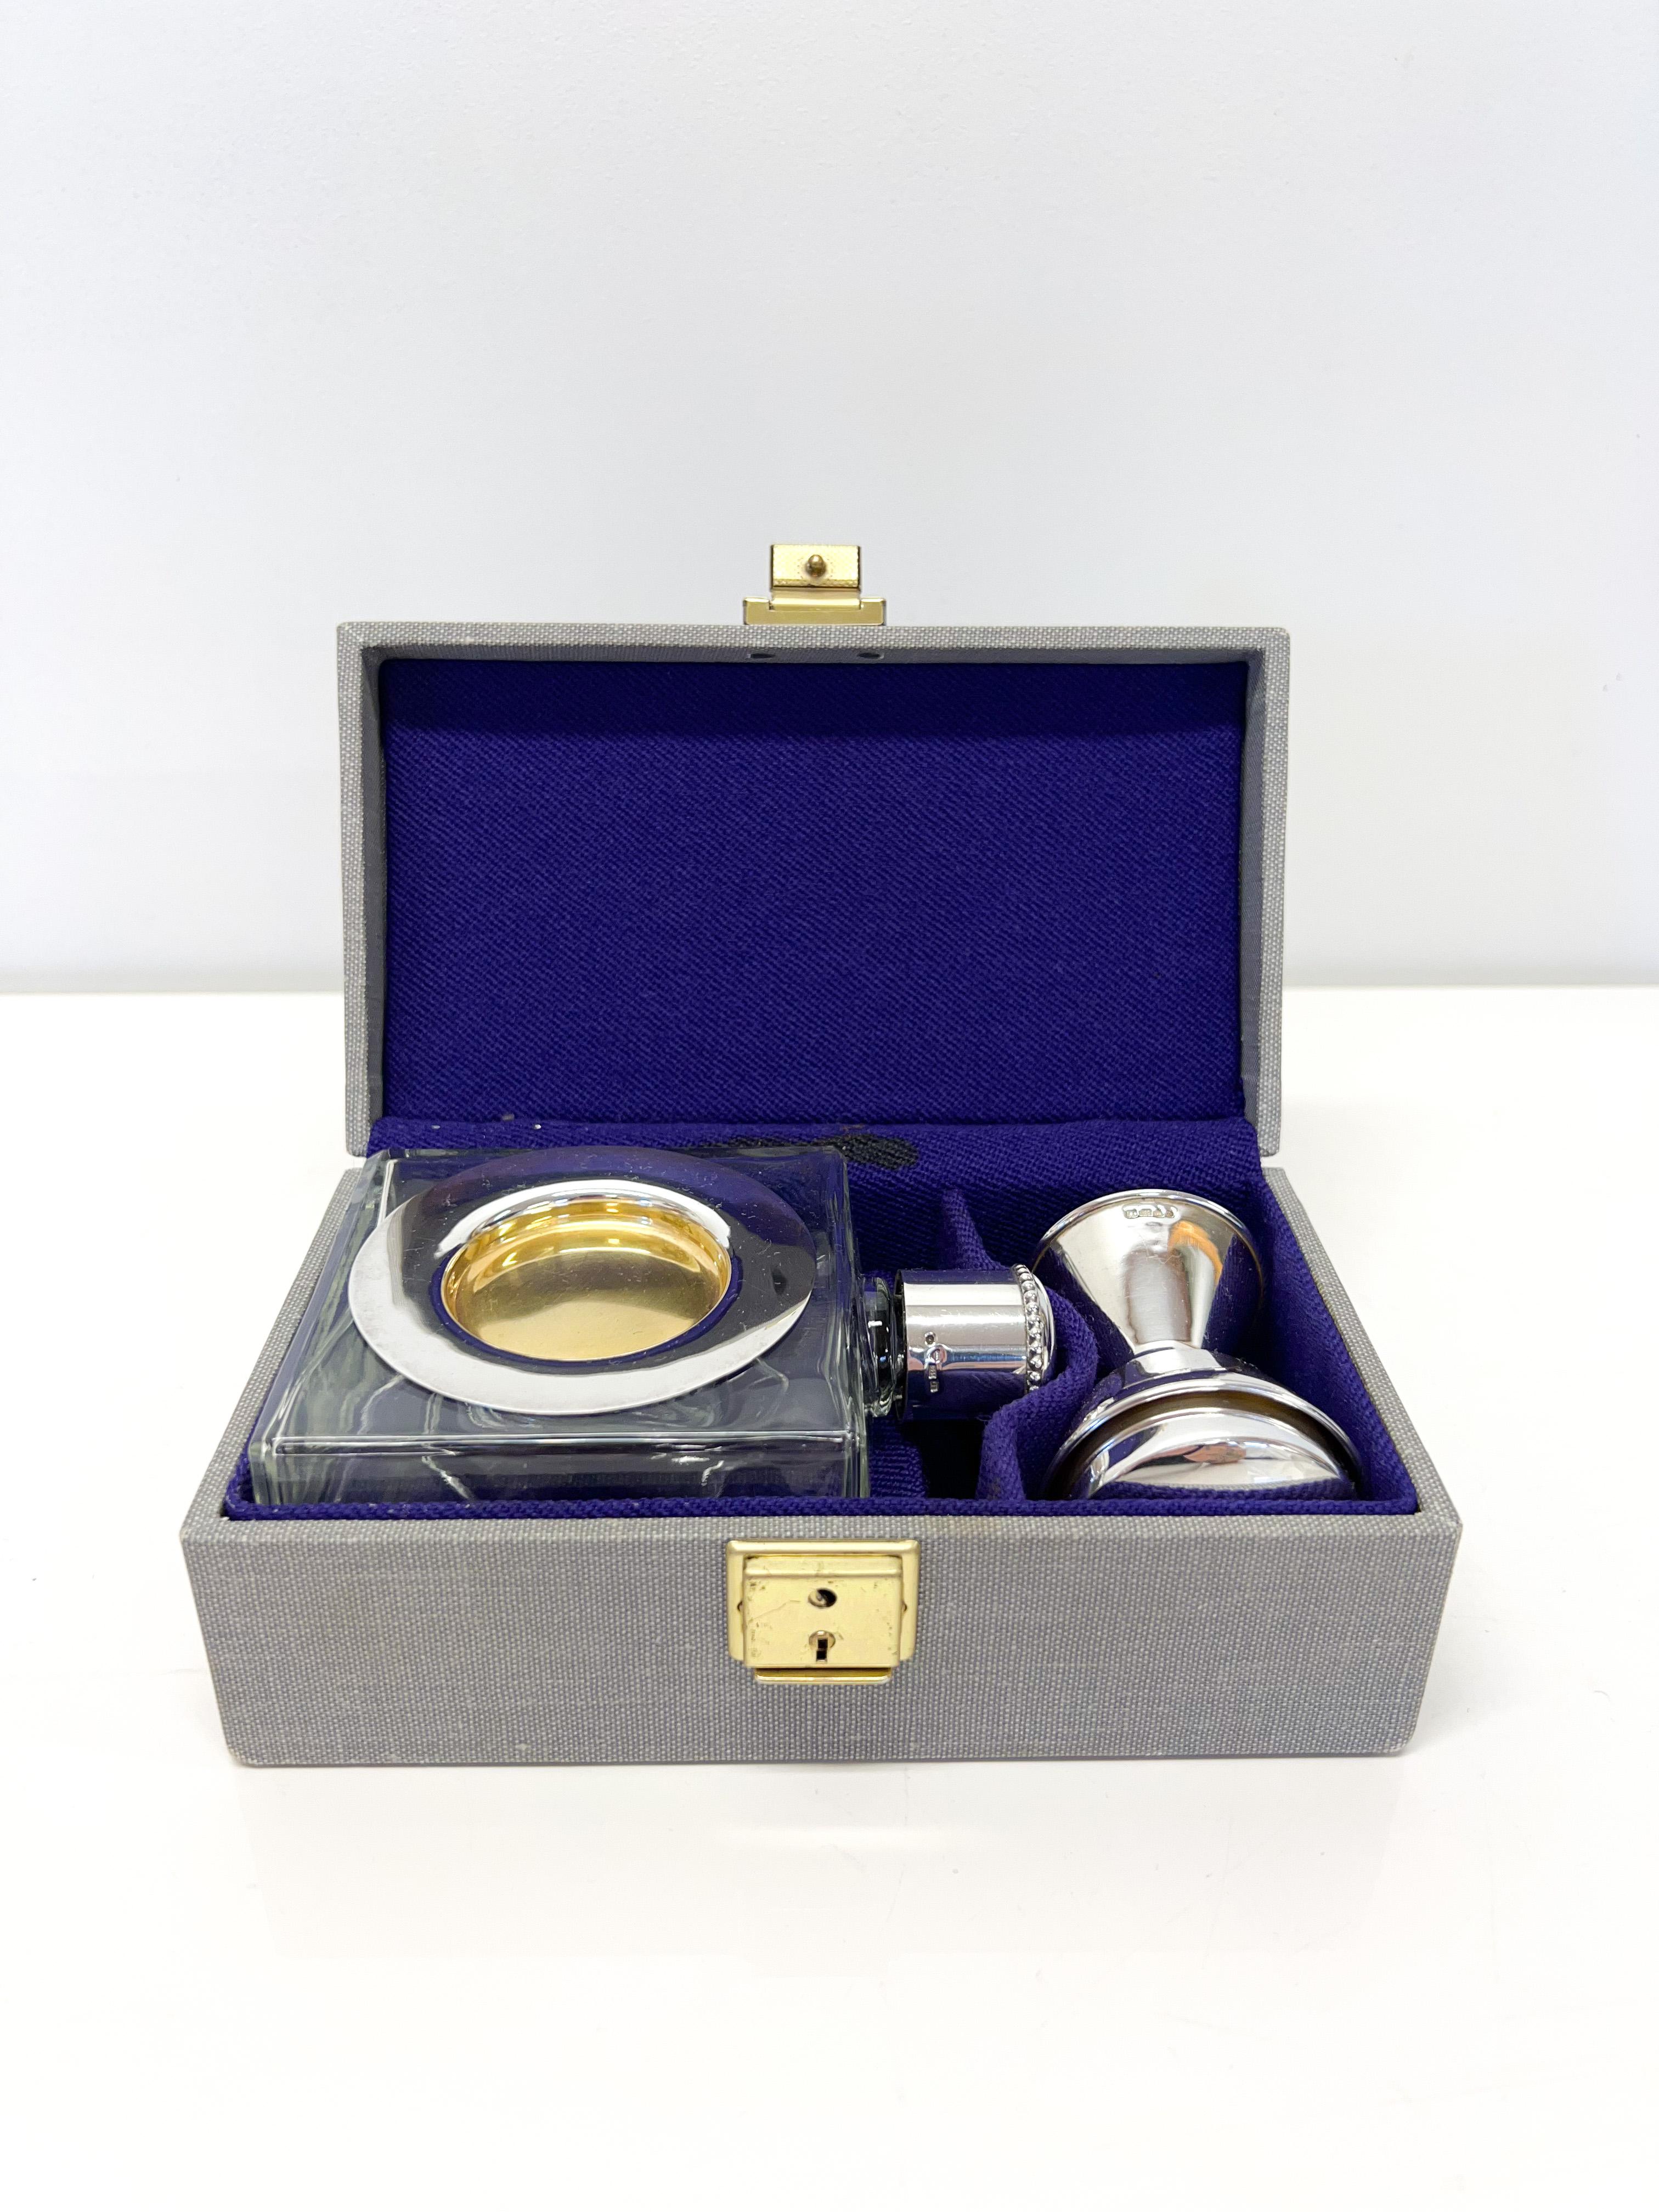 Sterling Silver Communion Utensils
Silver and Glass.
925 Silver
Made according to the stamps in 1977 in Finland.
A really nice little travel set.
A small bottle of wine in a box inside.
Bottle tested with water and holds liquid inside.
The width of